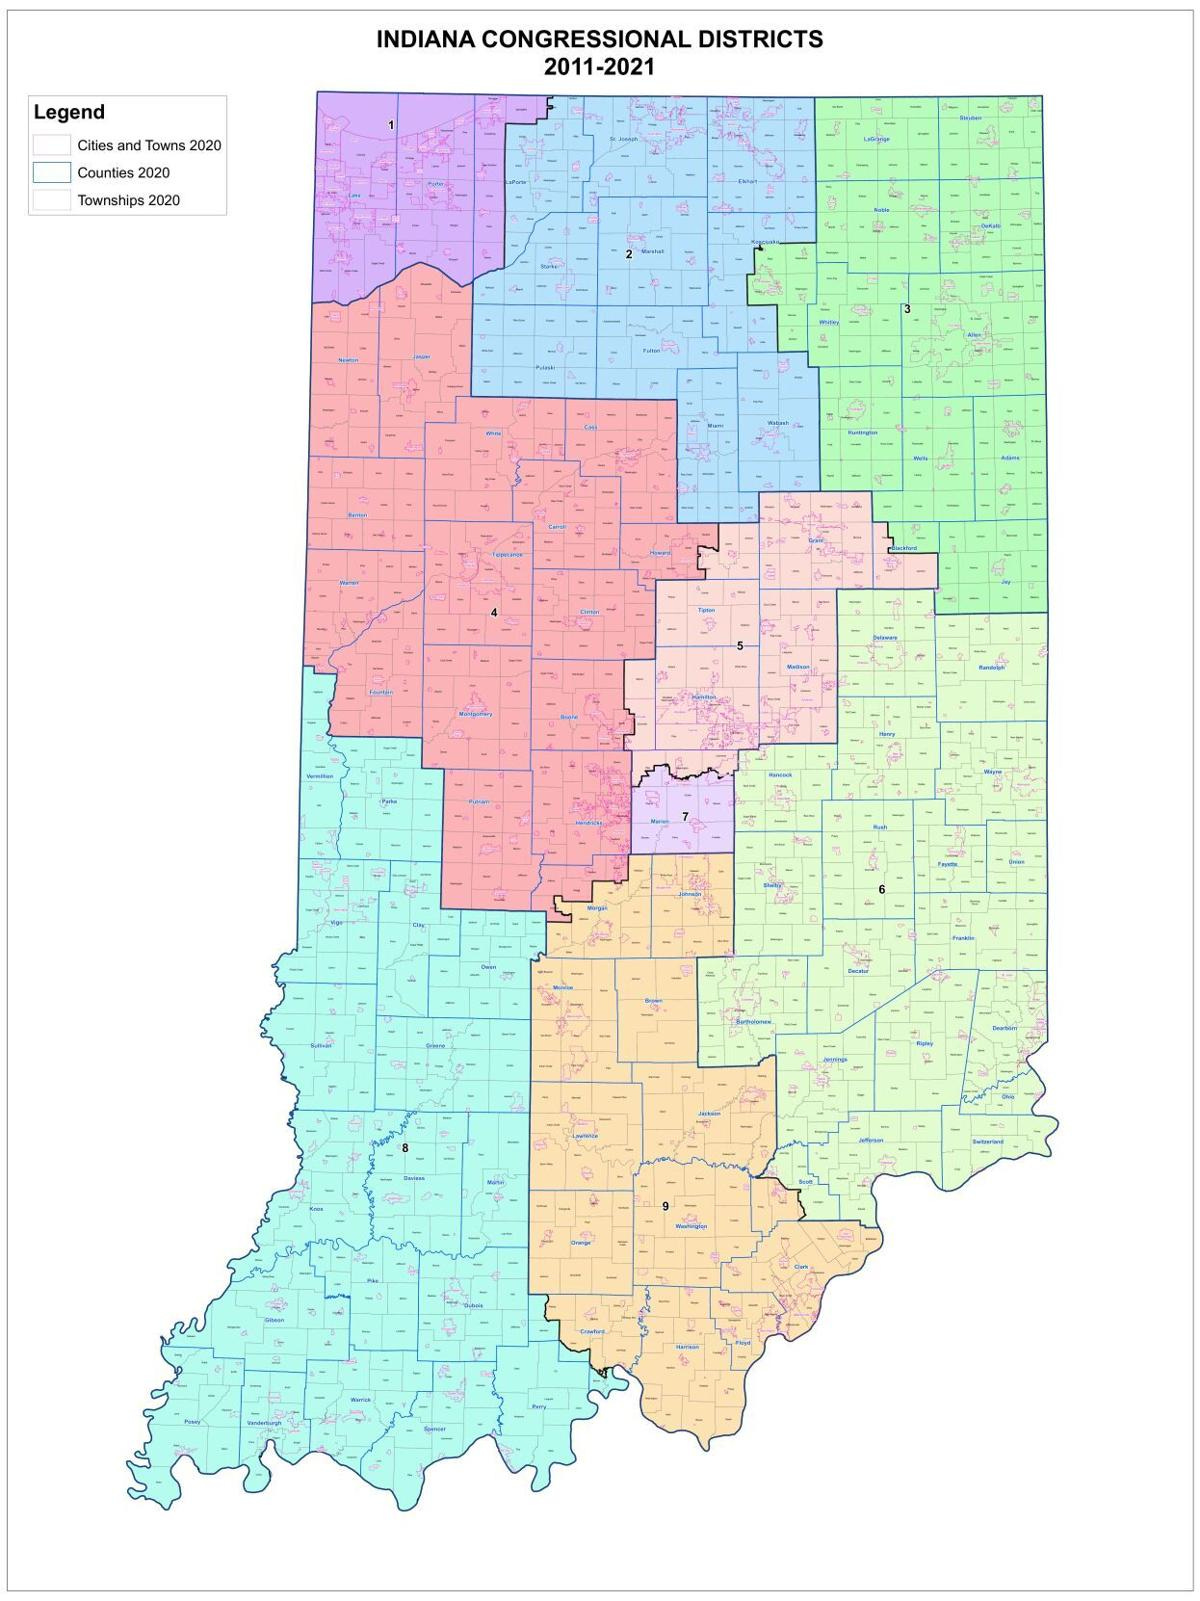 Congressional District Maps 2011